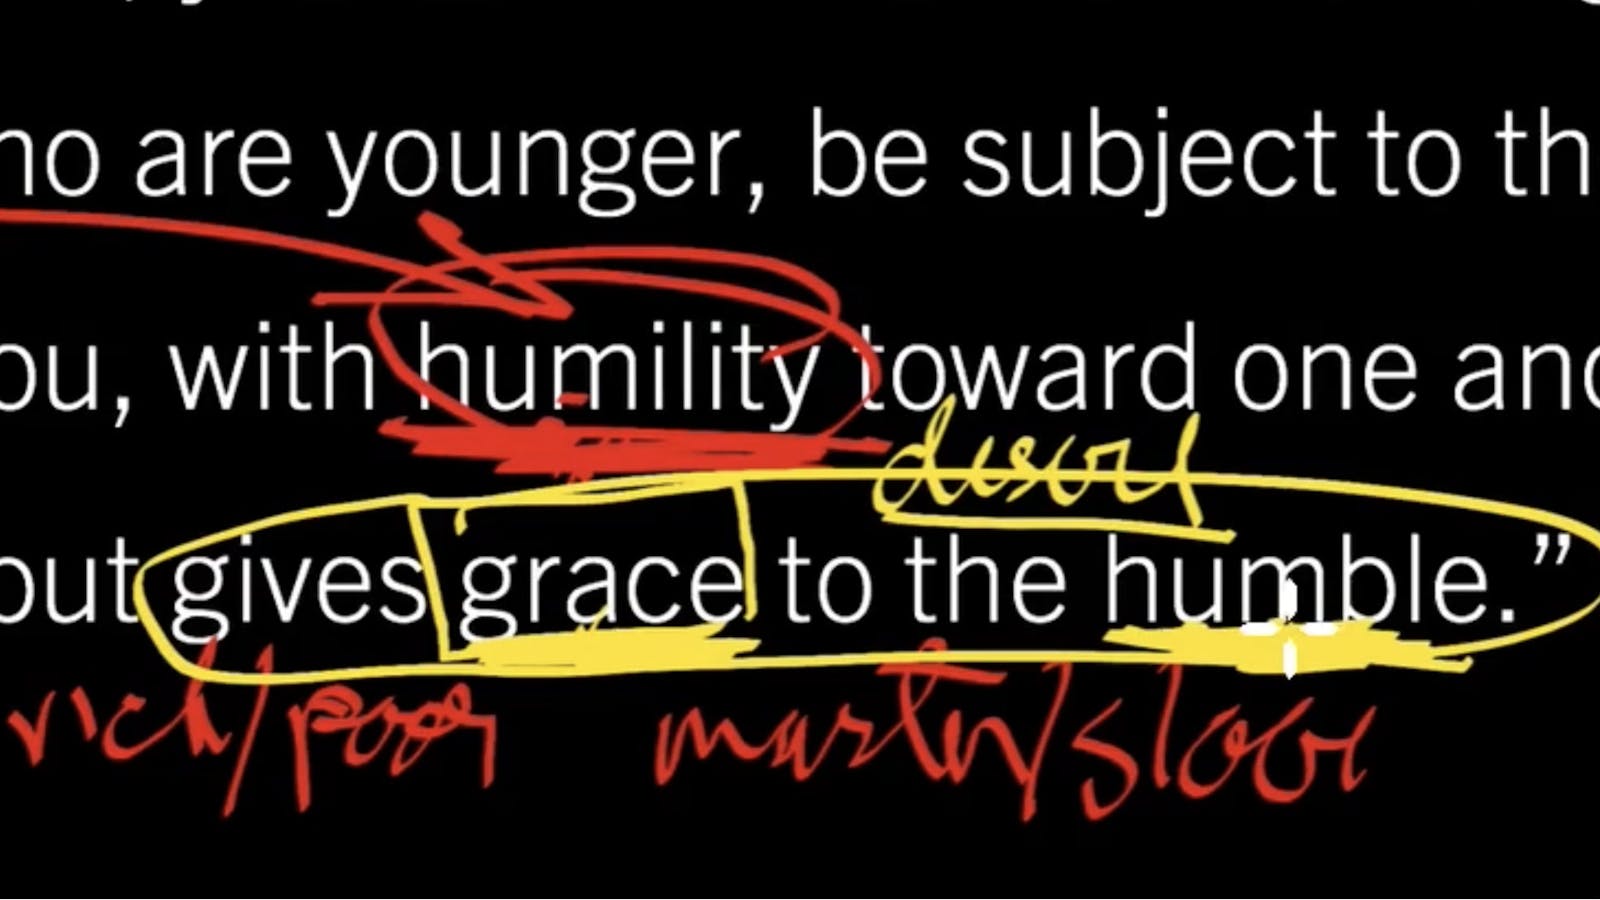 1 peter 5:5: clothe yourself in humility daily | desiring god